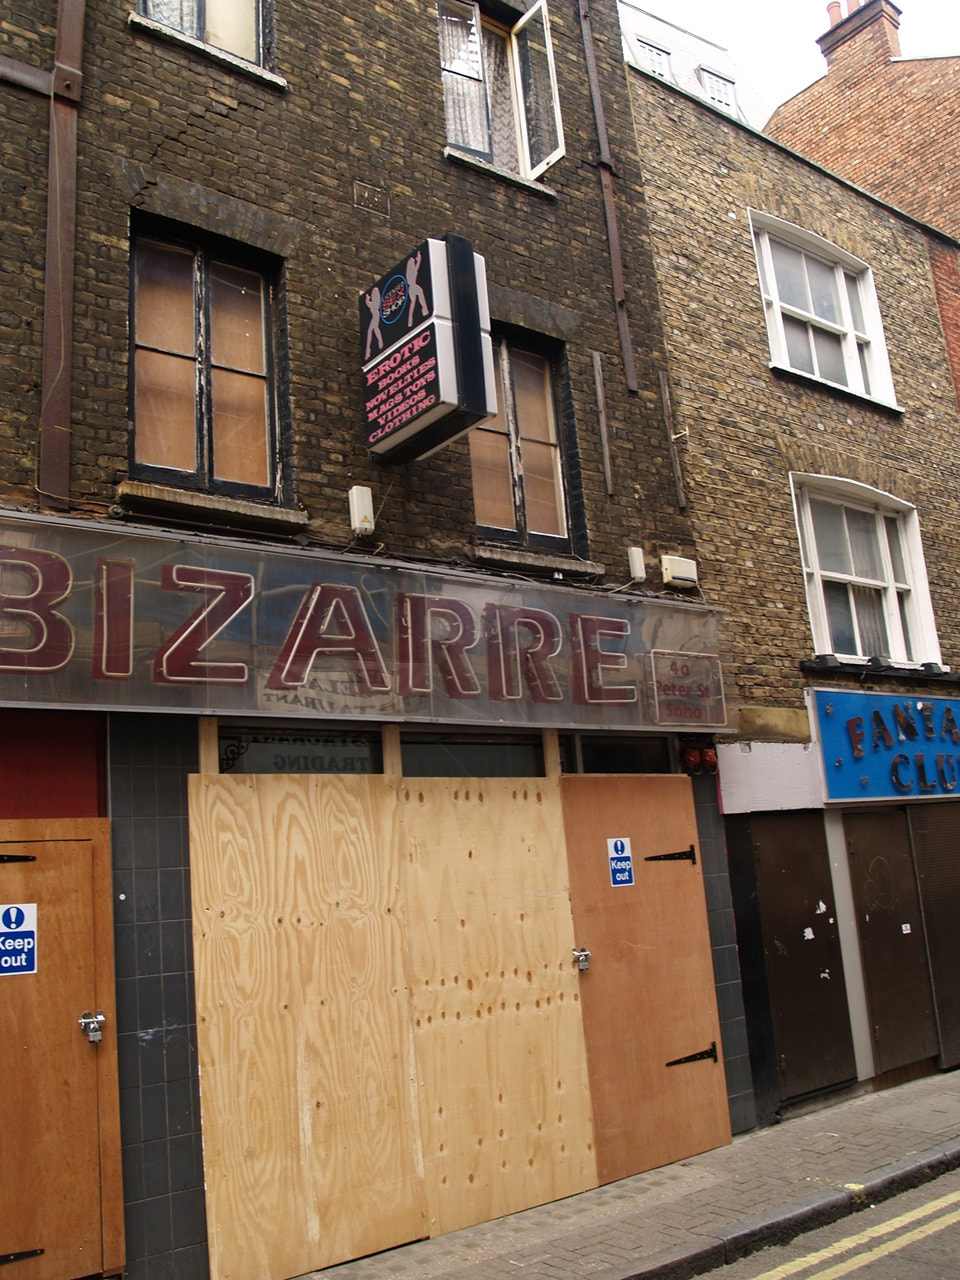 Boarded up derelict Soho sex shops after the council began clamping down, compulsorily purchasing premises thought to house brothels.